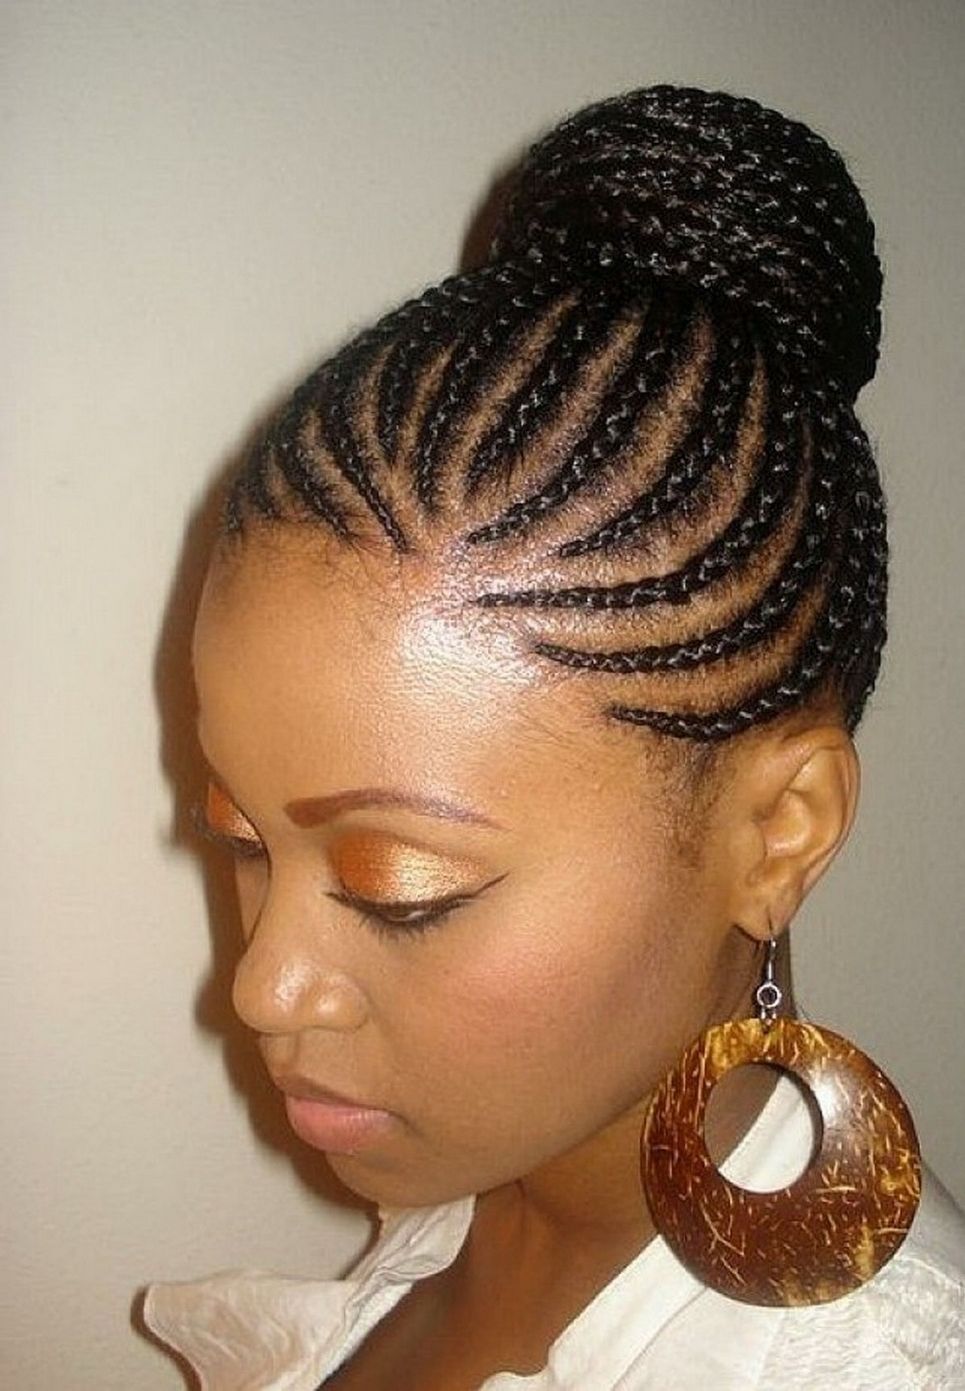 Hairstyles To Do For Black Braided Bun Hairstyles Images About Hair Regarding Favorite African American Braided Bun Hairstyles (View 7 of 15)